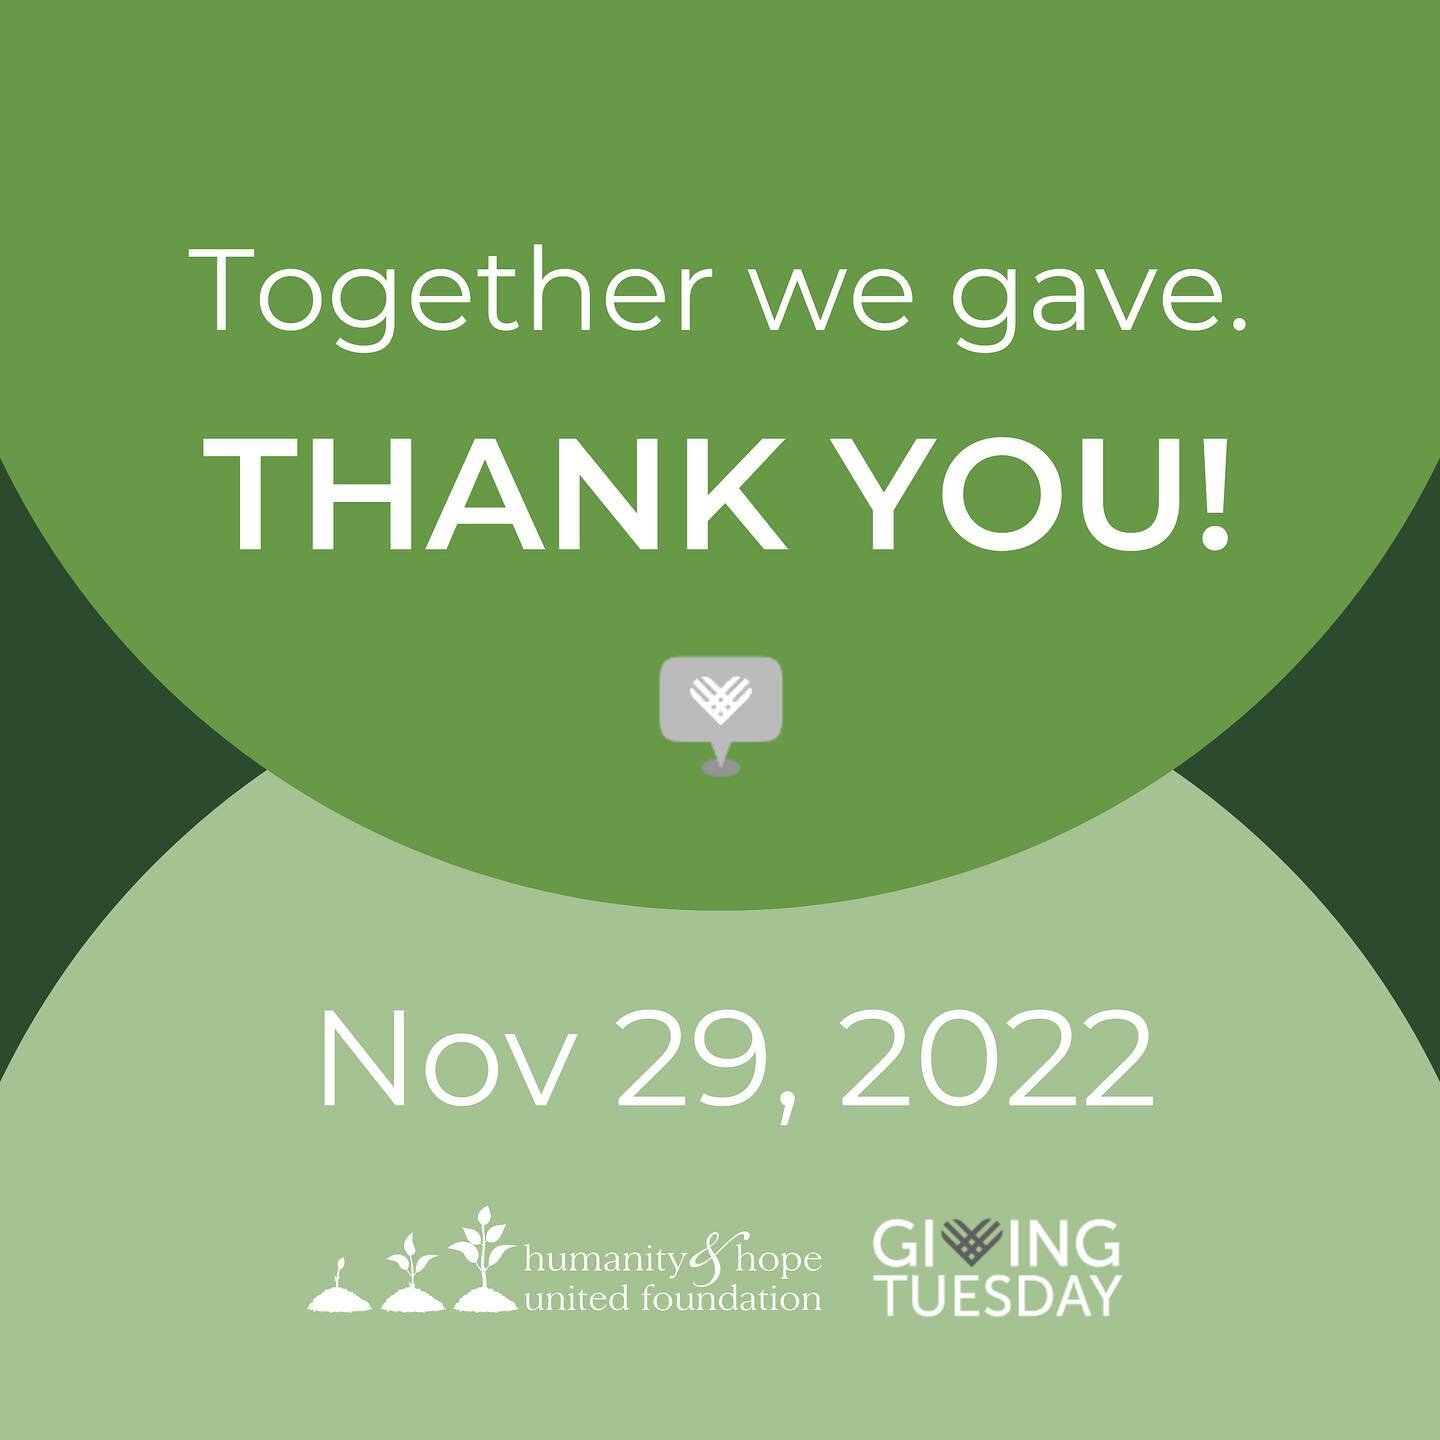 Thank you 💚

So many of you joined us yesterday in Giving Tuesday to support and grow our education program. We were able to sponsor 4 more students and raise nearly $4k to go towards purchasing a school bus! We are blown away by your generosity. 

